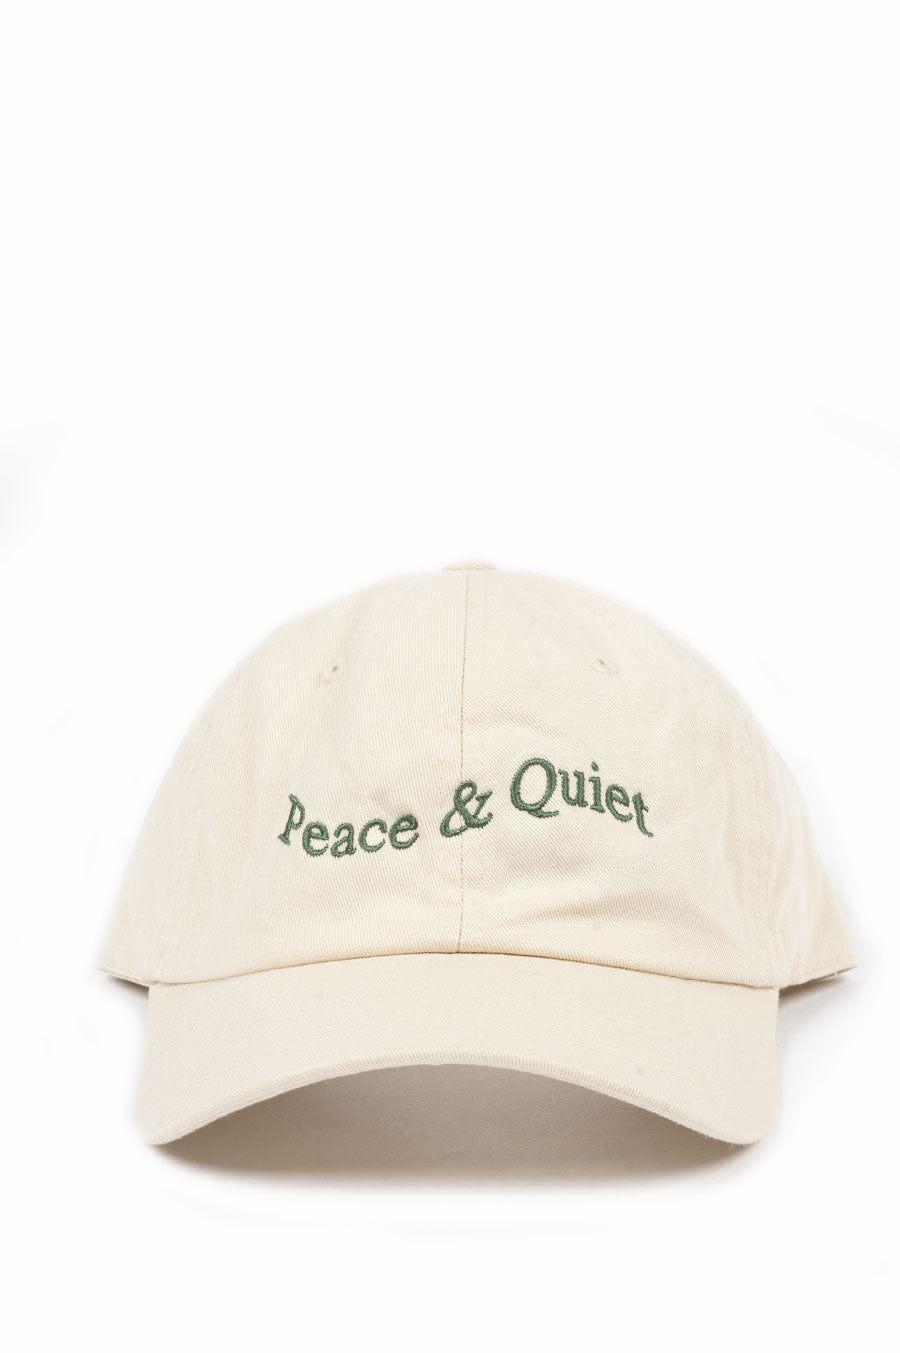 THE MUSEUM OF PEACE AND QUIET HAT WORDMARK EMBROIDERED BONE